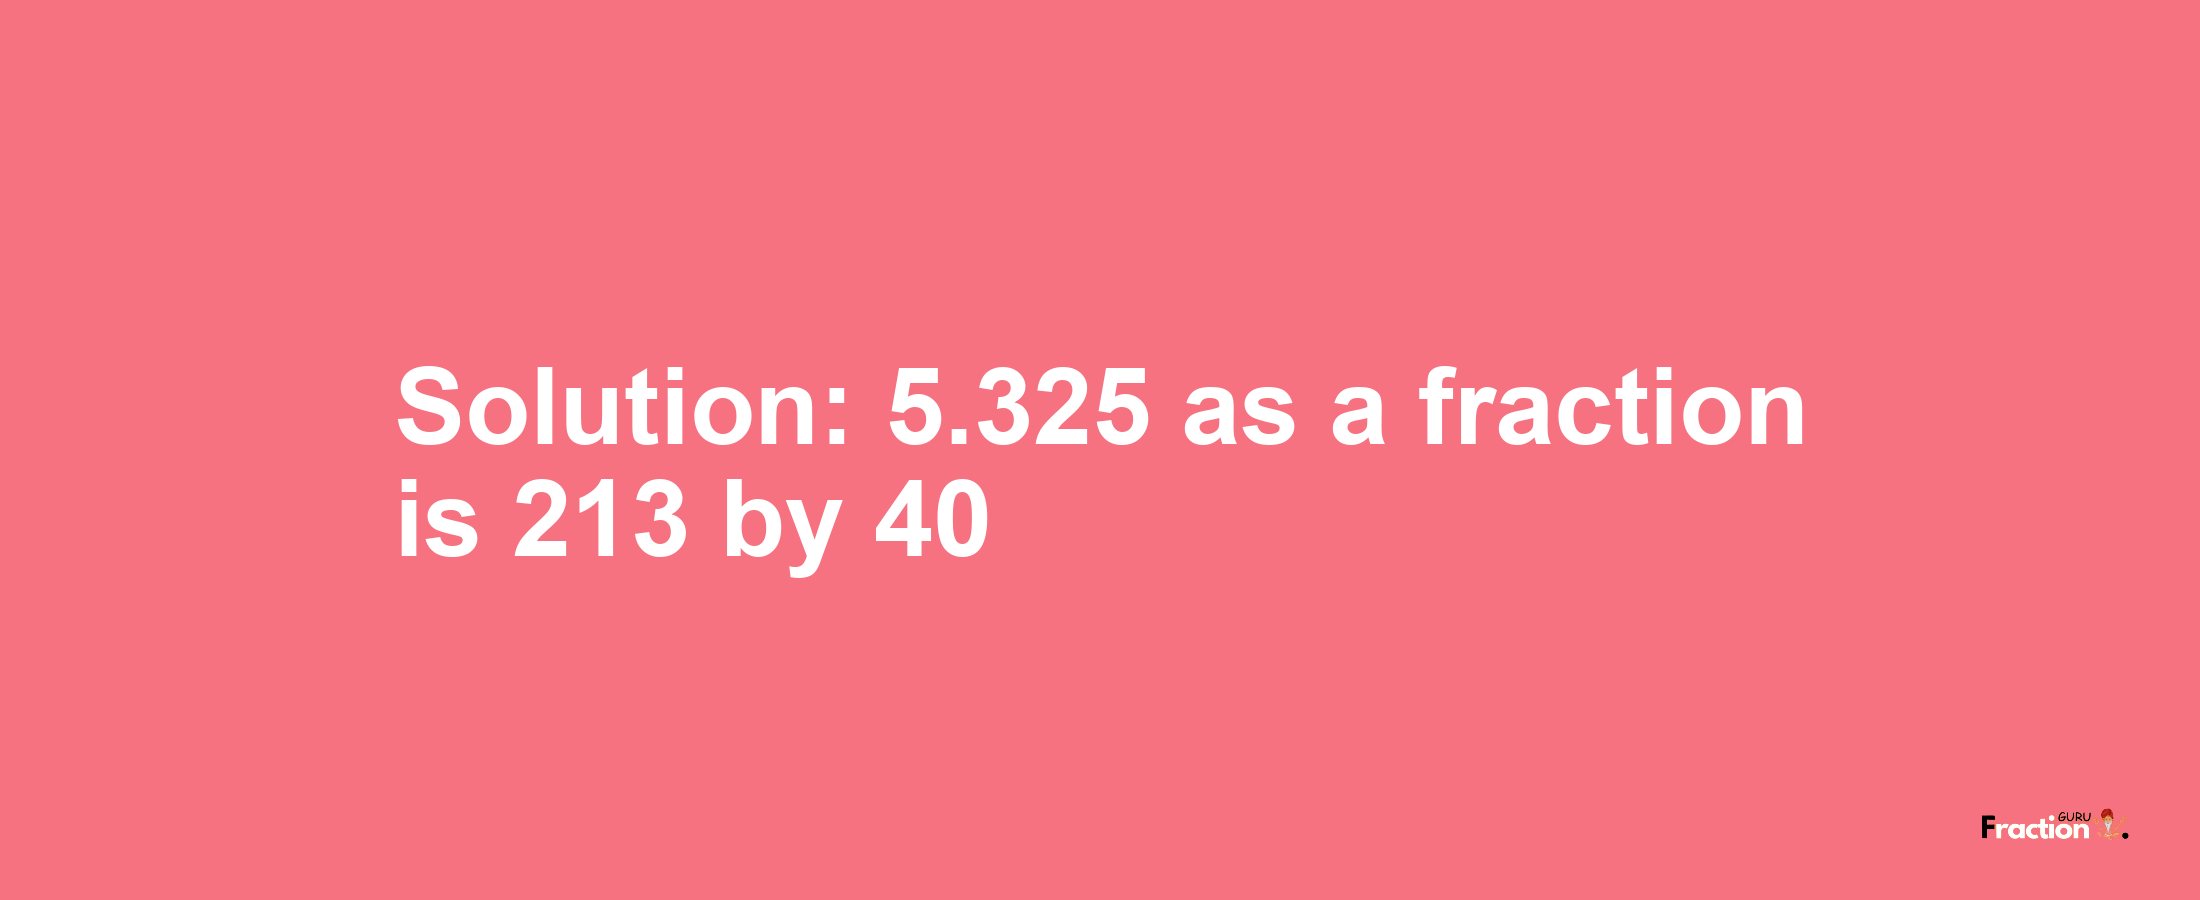 Solution:5.325 as a fraction is 213/40